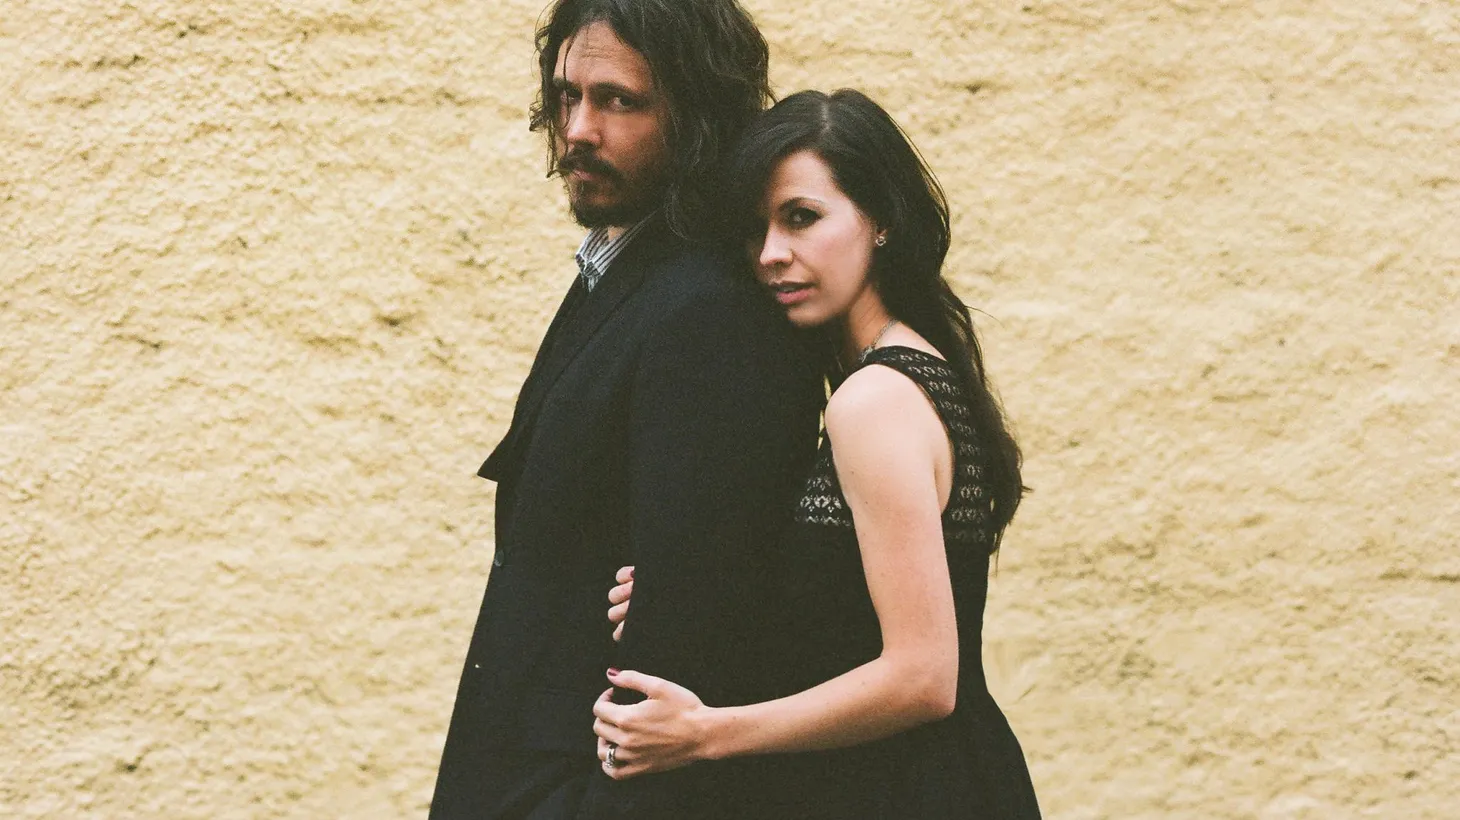 Indie folk rock duo The Civil Wars are one of this year's biggest indie success stories...